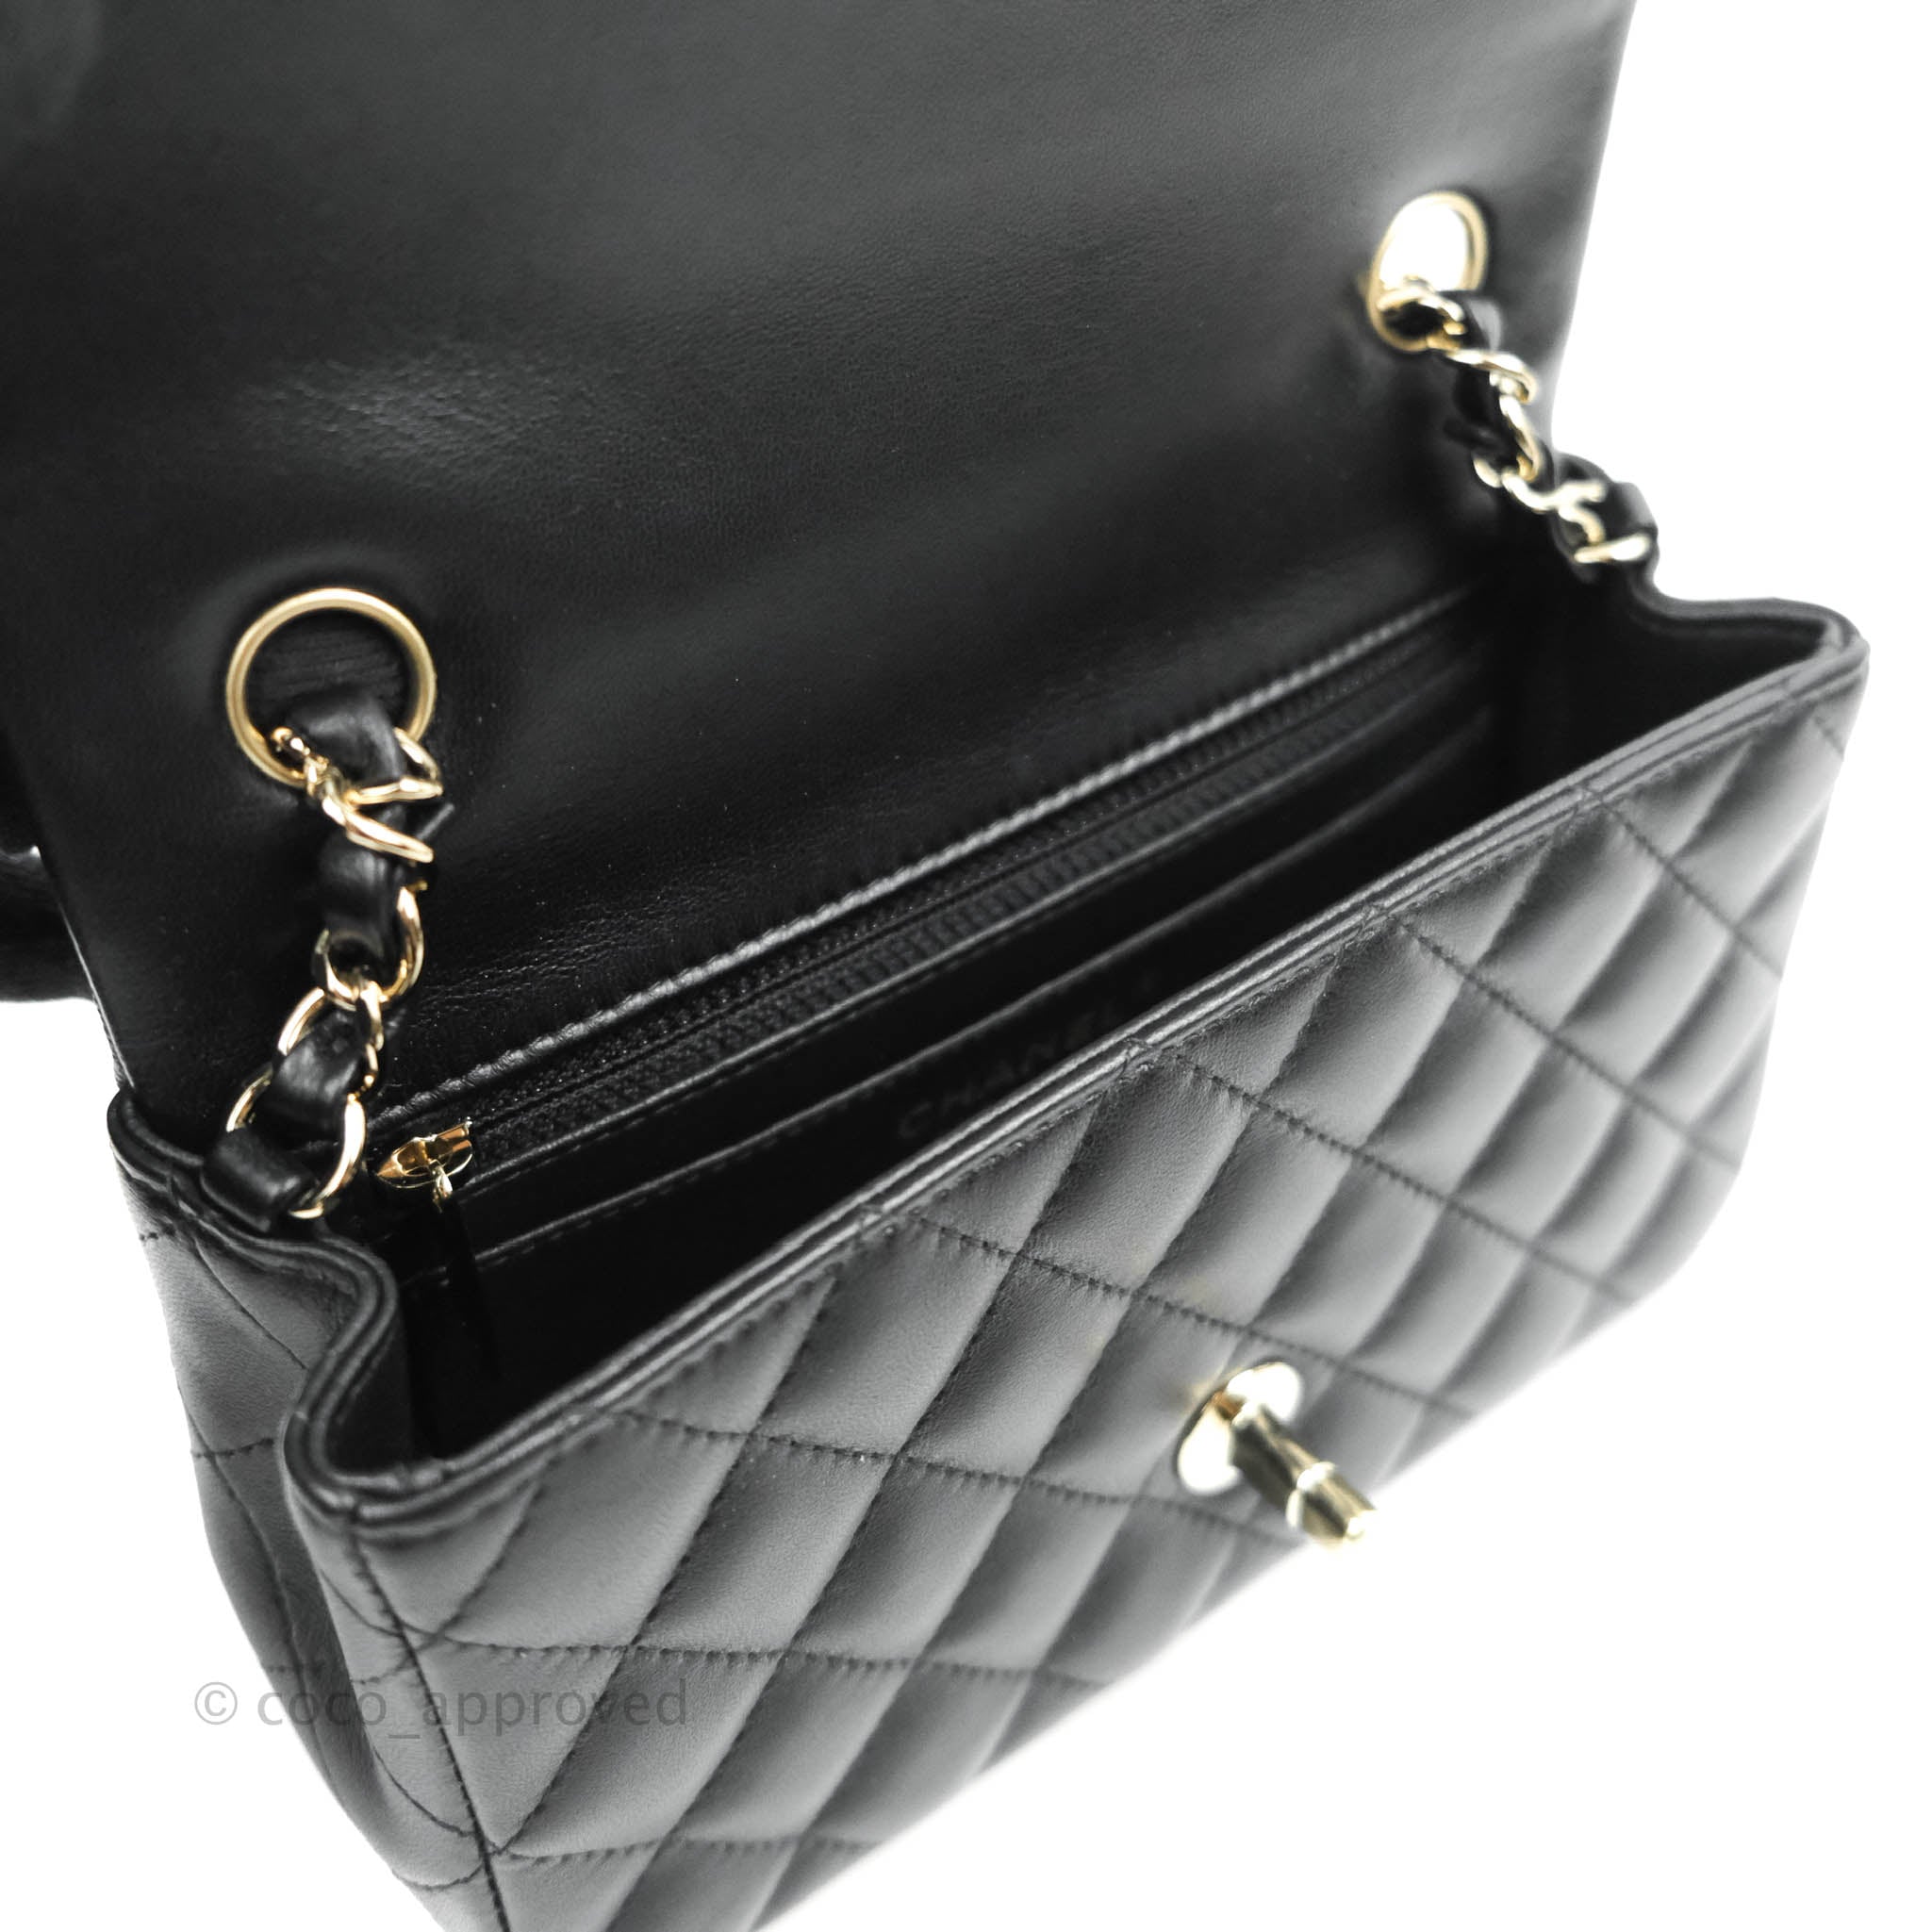 chanel black tote with gold chain